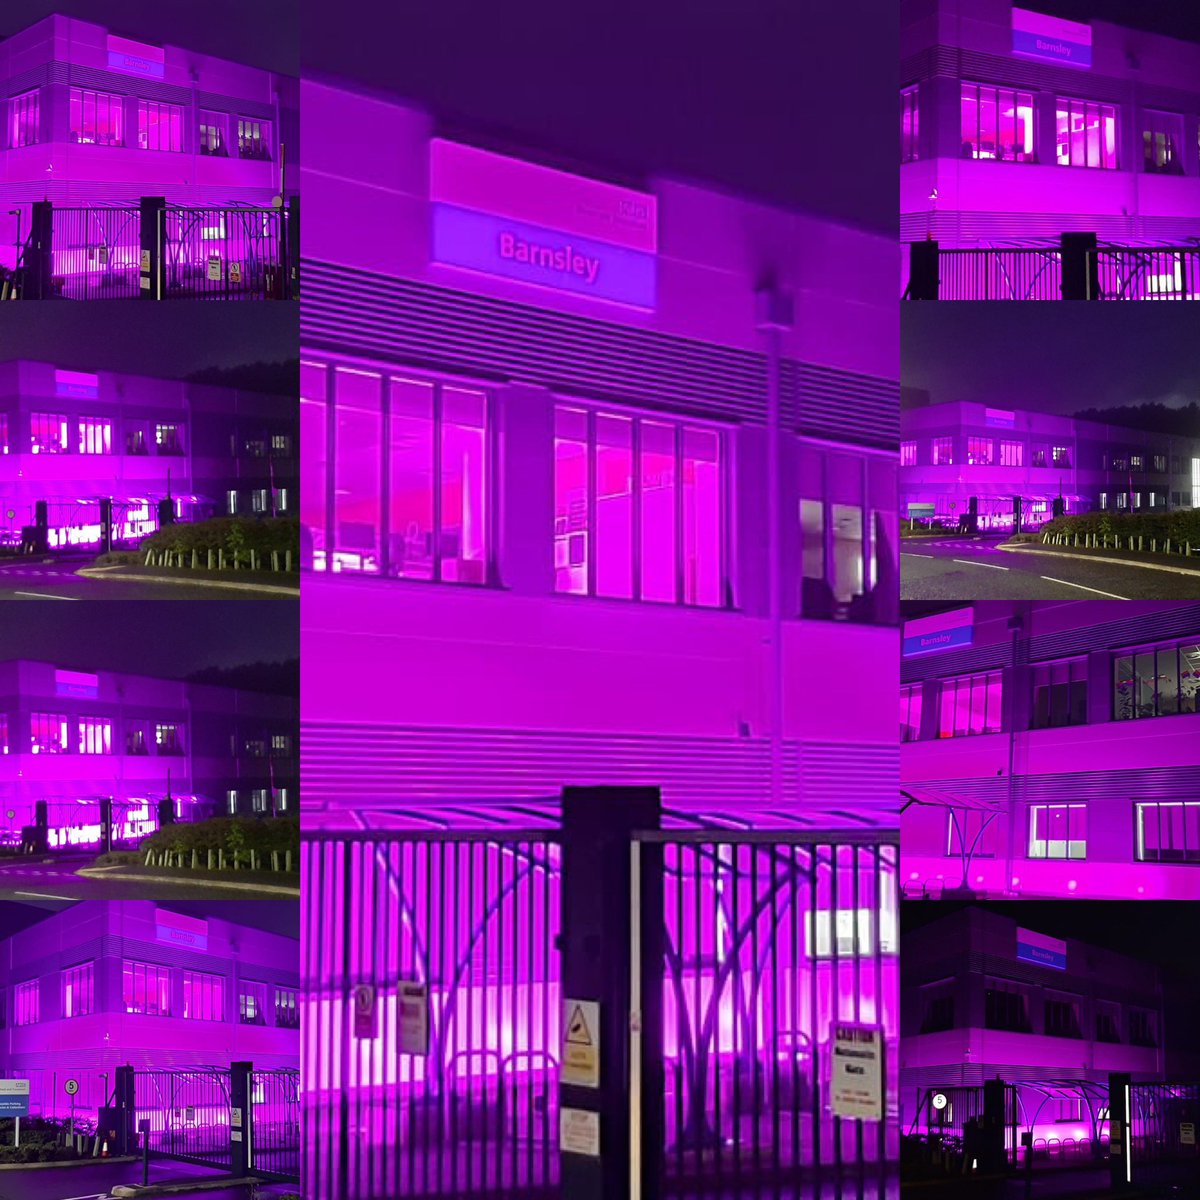 Our Barnsley NHSBT Building in all its pink glory 💗 Please register your decision on organdonation.nhs.uk and let your nearest and dearest know. #OrganDonationWeek2023 @NHSOrganDonor @gordoncrowe @sarahwhittingh8 @smflood @BuglassHelen @share_wishes